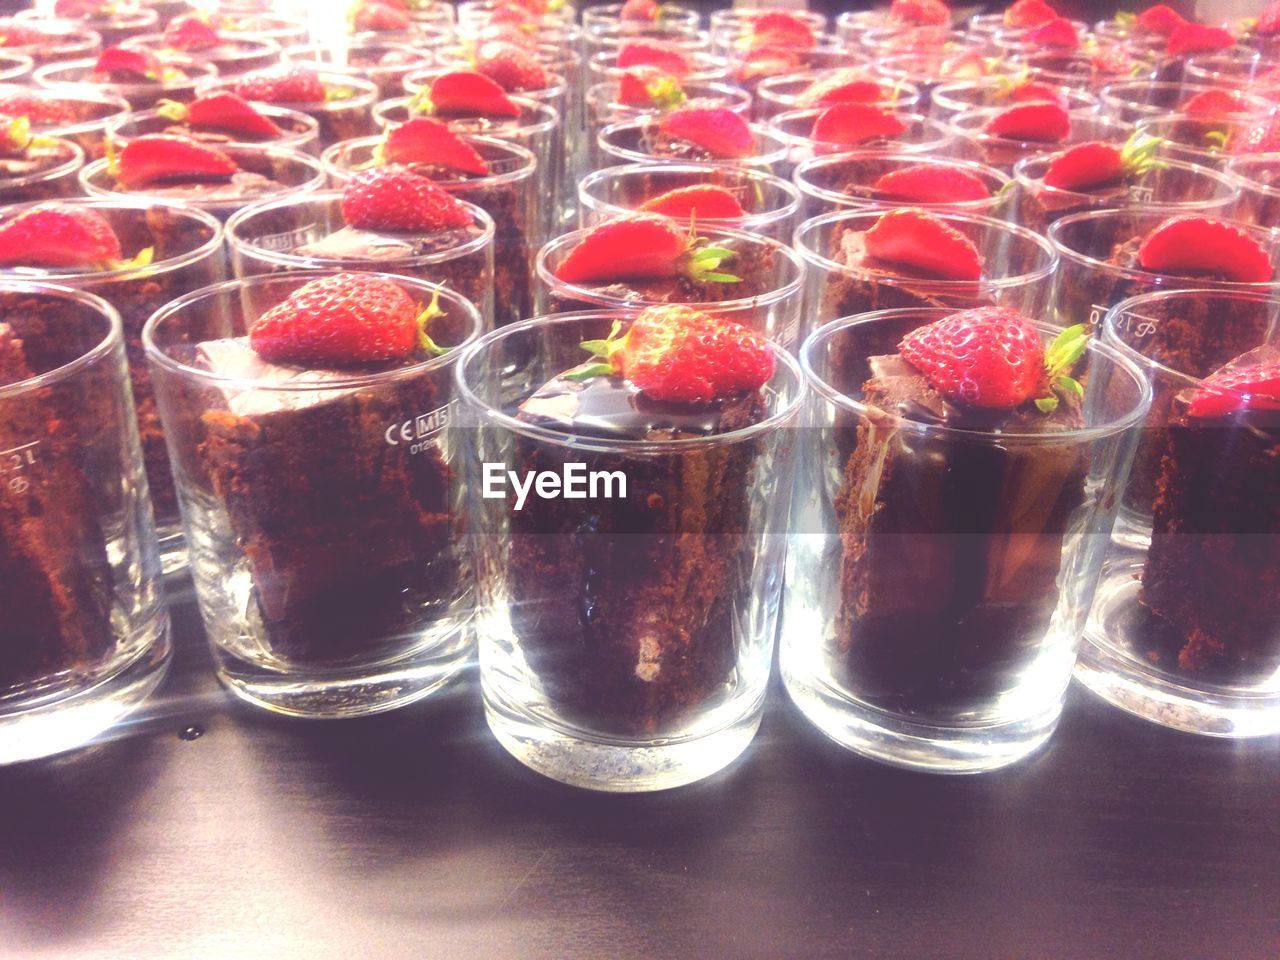 Chocolate and strawberry desserts in glasses